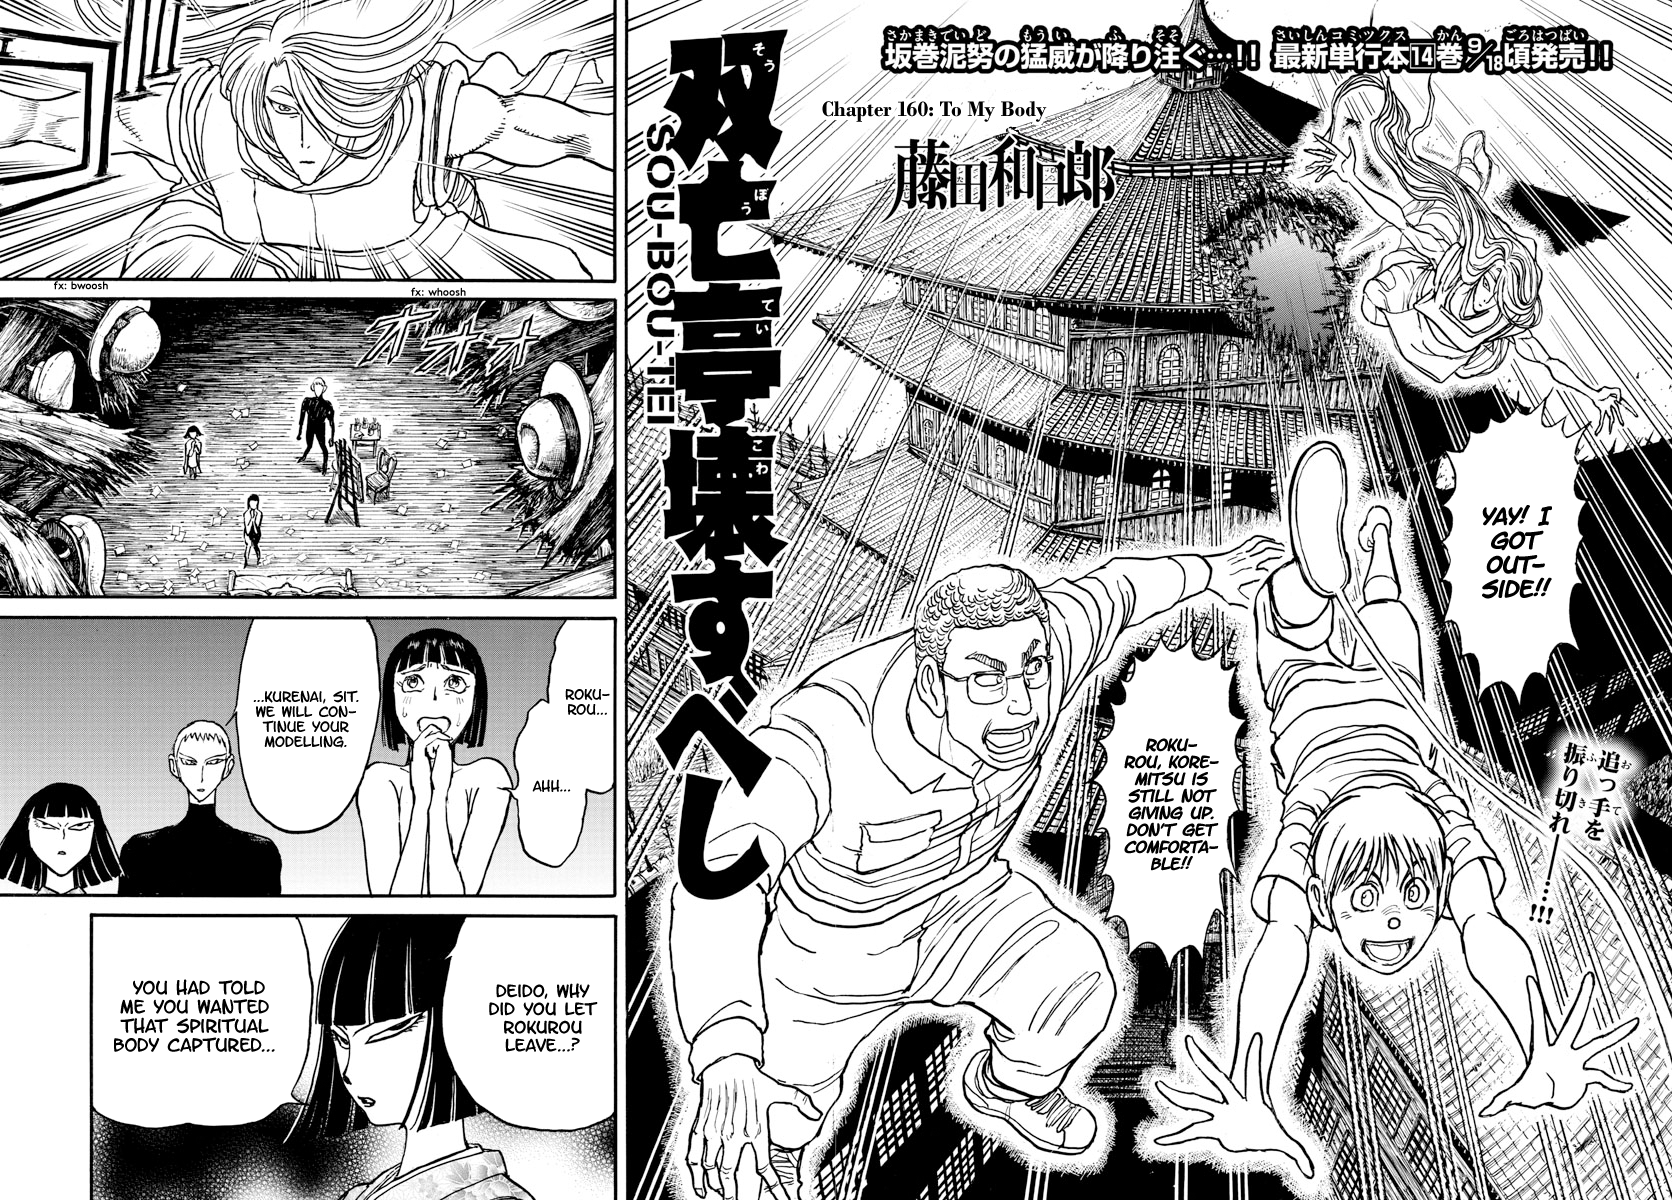 Souboutei Must Be Destroyed Vol.17 Chapter 160: To My Body - Picture 2